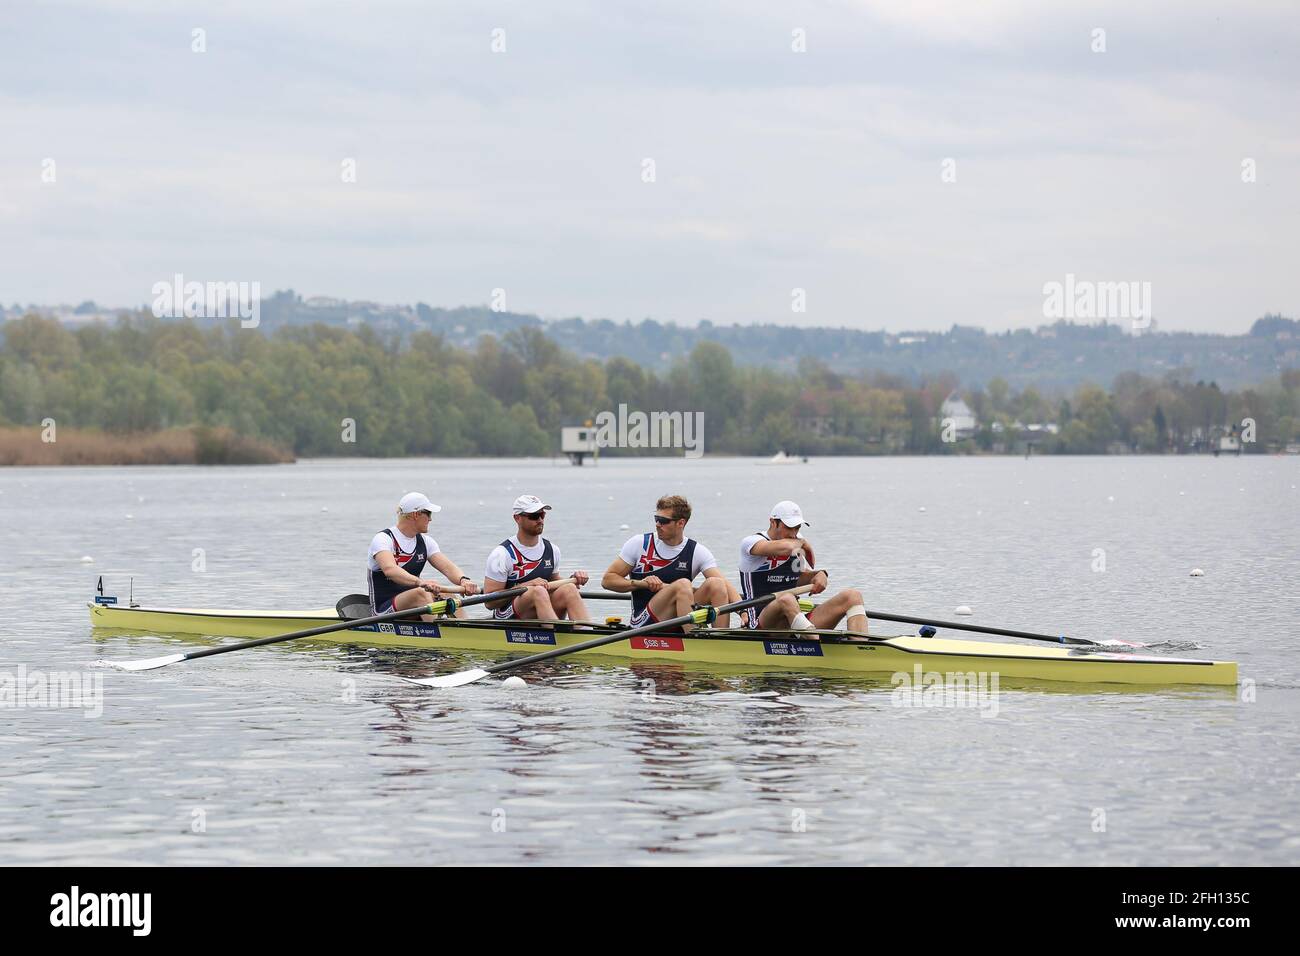 Oliver Robert George Cook, Matthew Rossiter, Rory Gibbs and Sholto Carnegie of Great Brtiain win the Men's Four Semifinal A/B 2 on Day 2 at the Europe Stock Photo